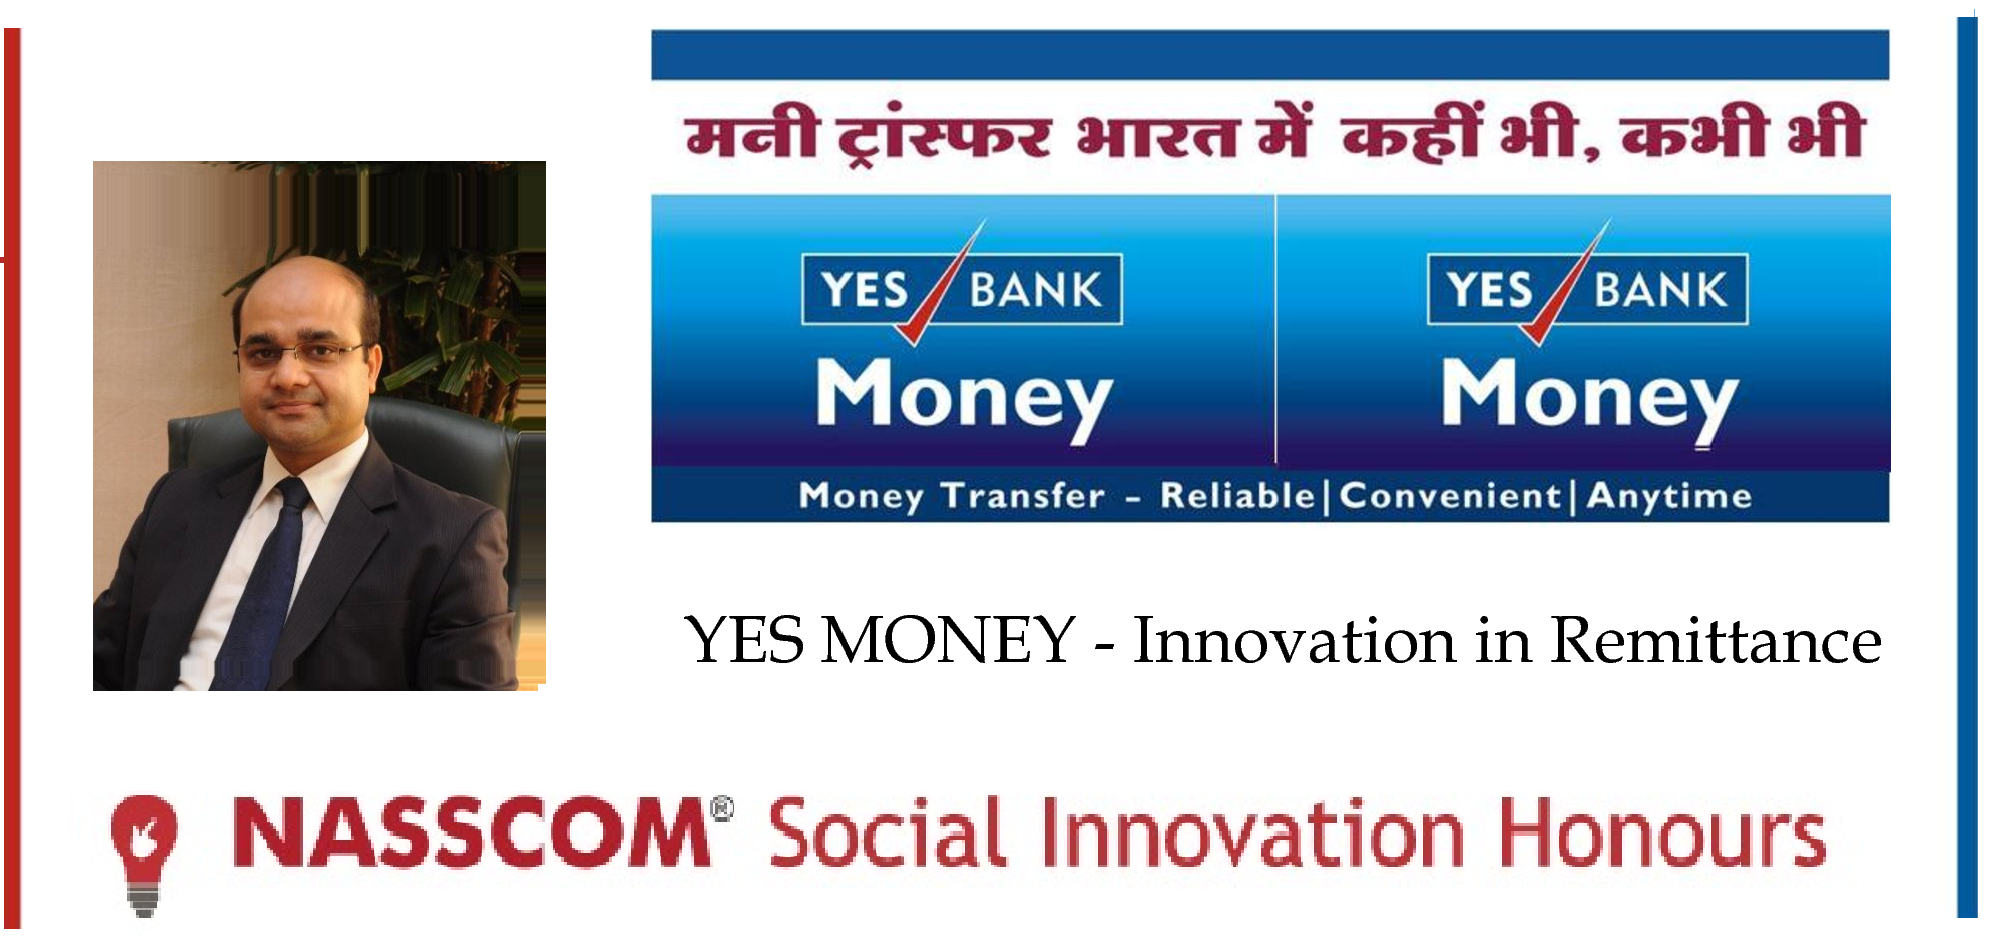 Yes Money from Yes Bank - Providing Banking Solutions to the Urban Poor by Leveraging on ICT